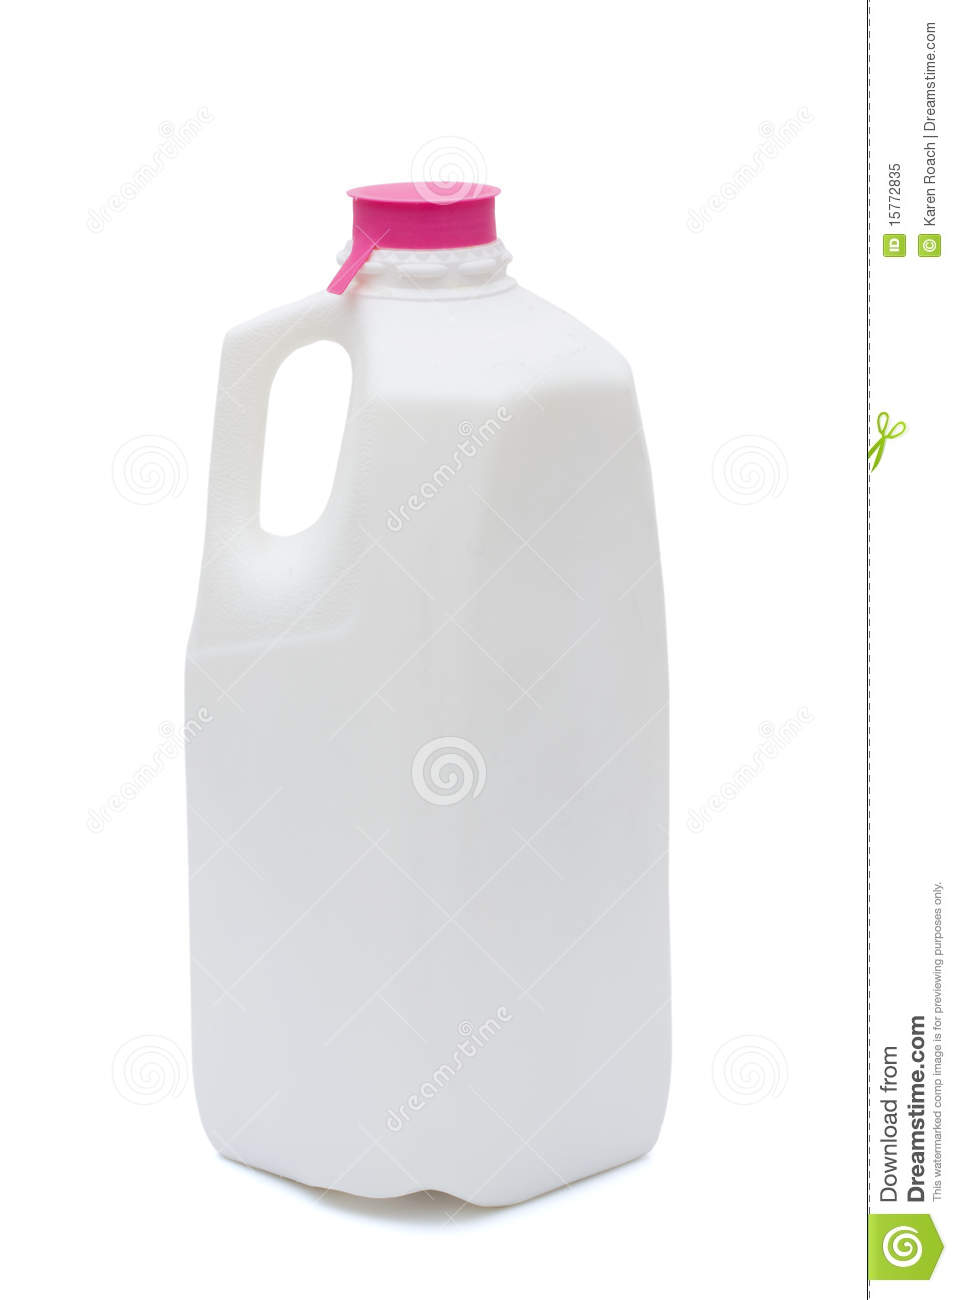 Milk Container Royalty Free Stock Photo   Image  15772835